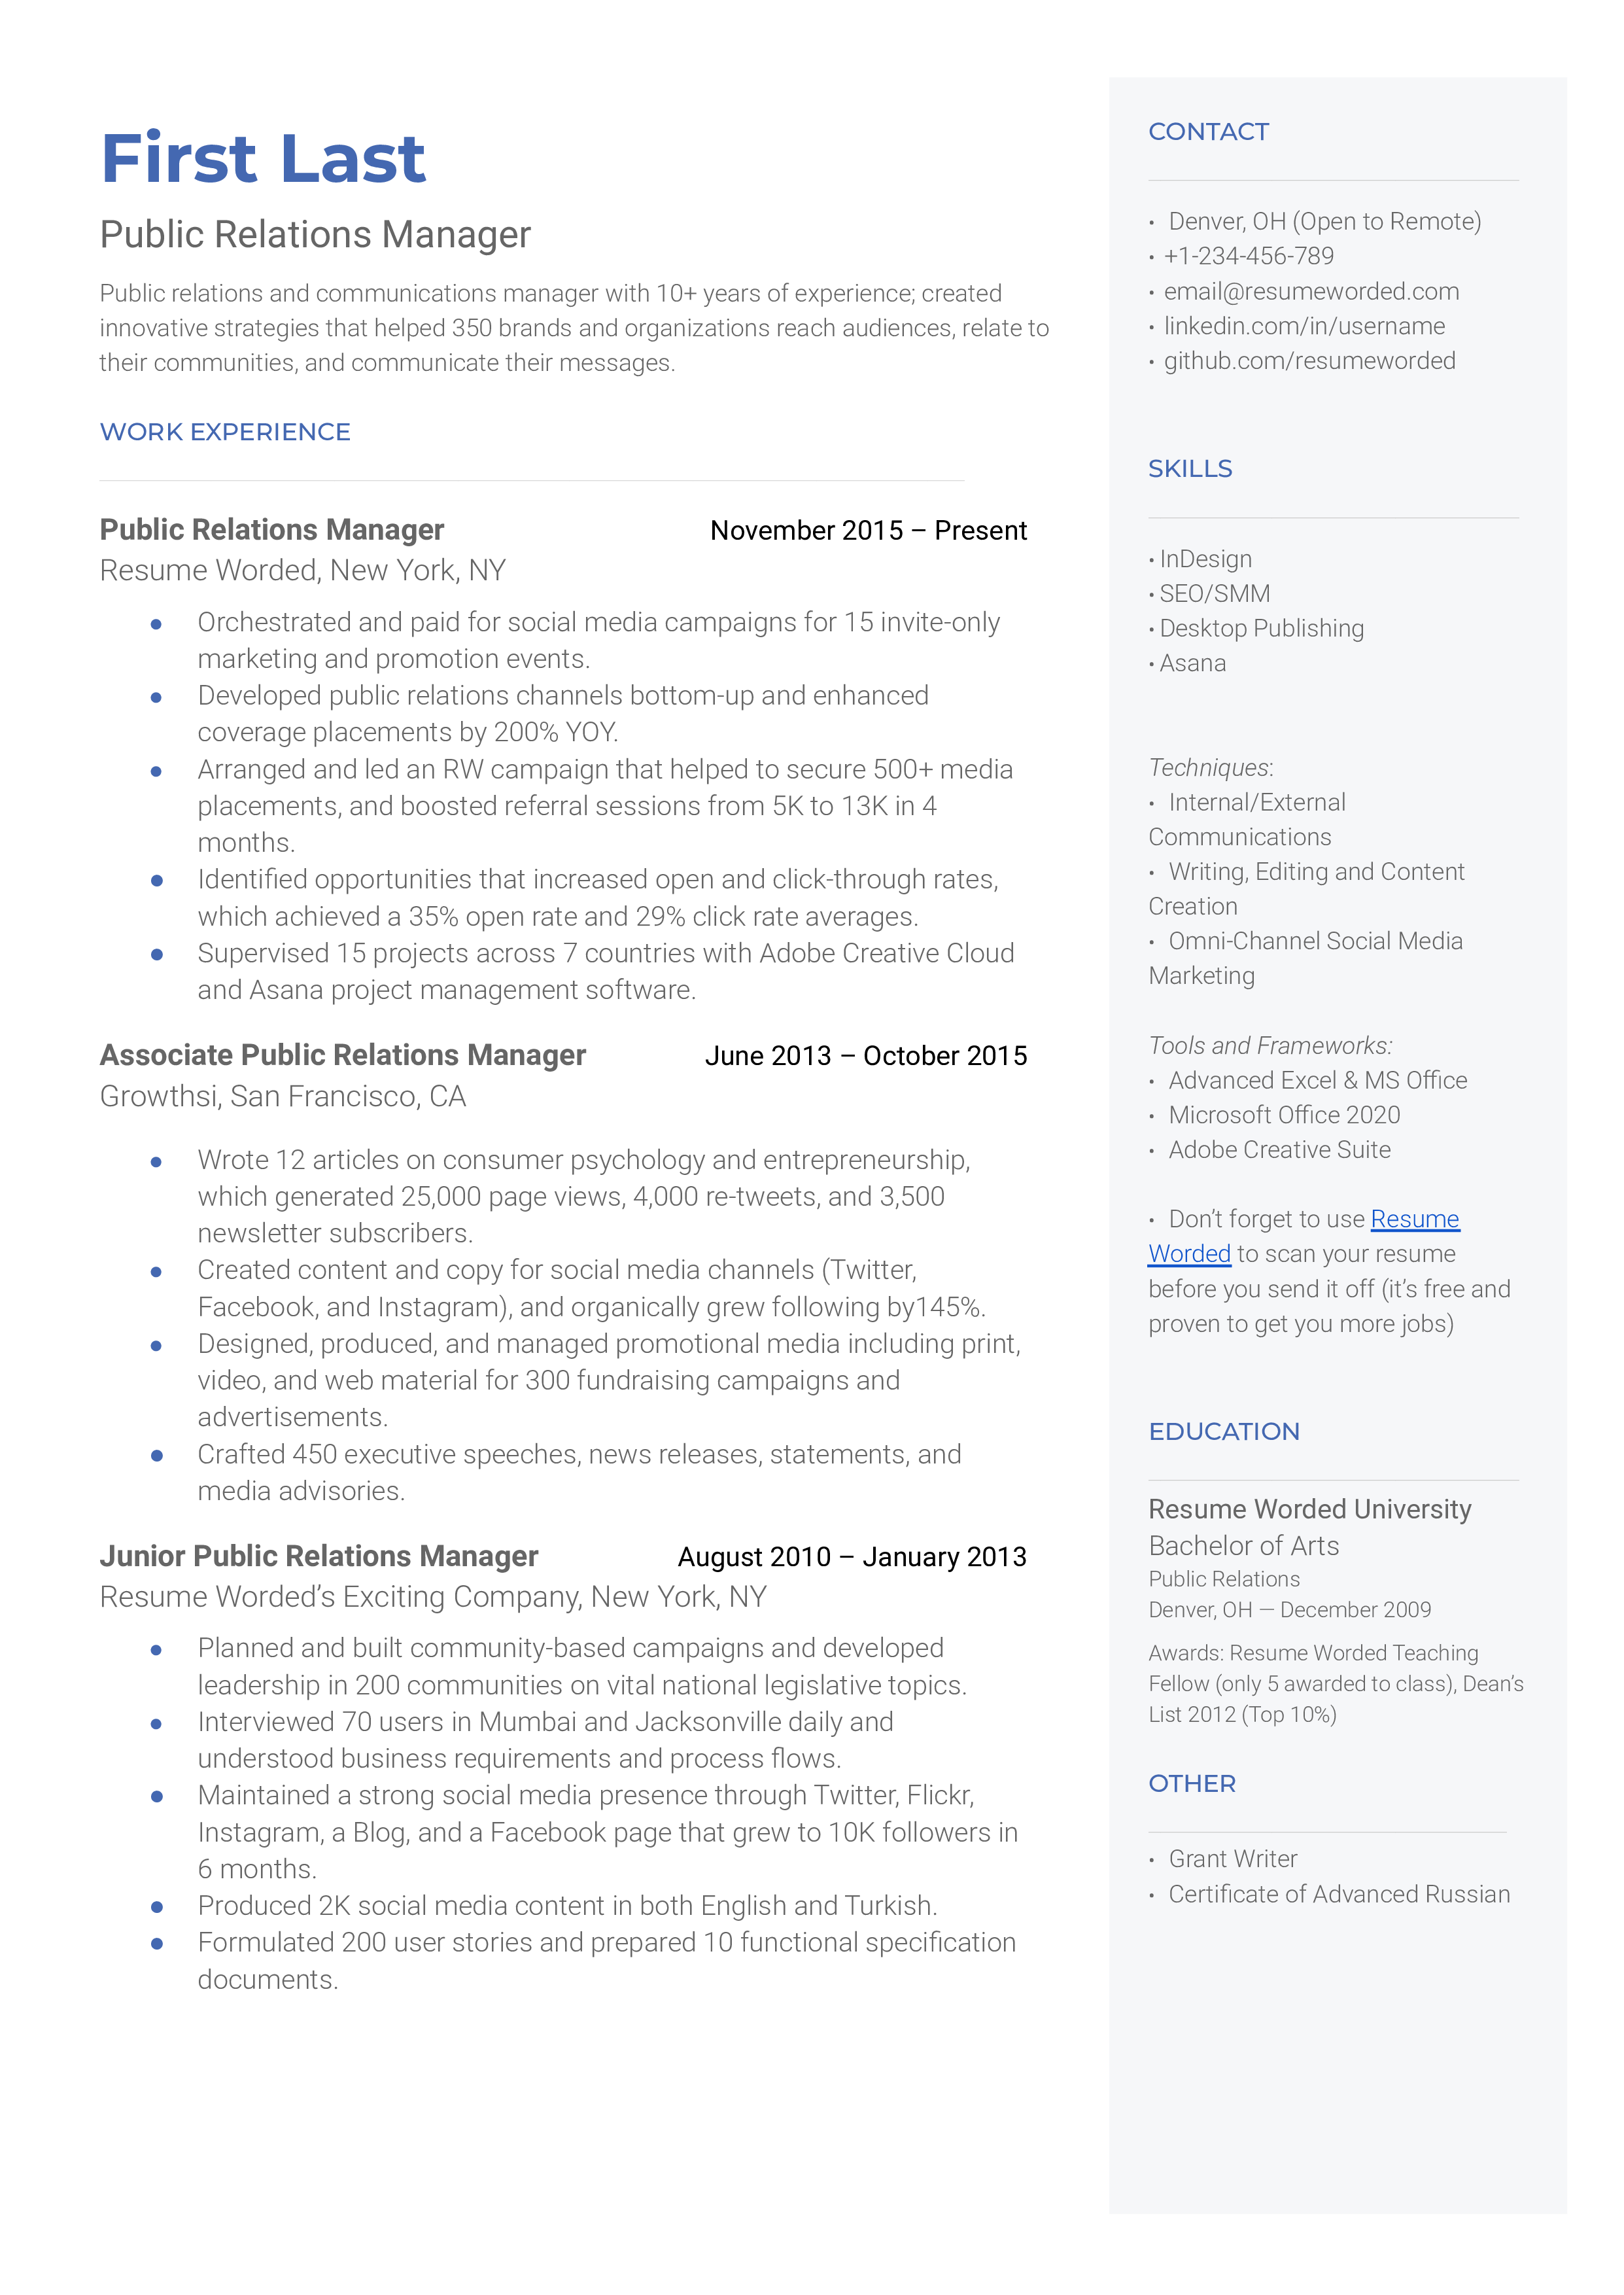 A public relations manager resume that highlights experience with public relations and managing an organization’s public image